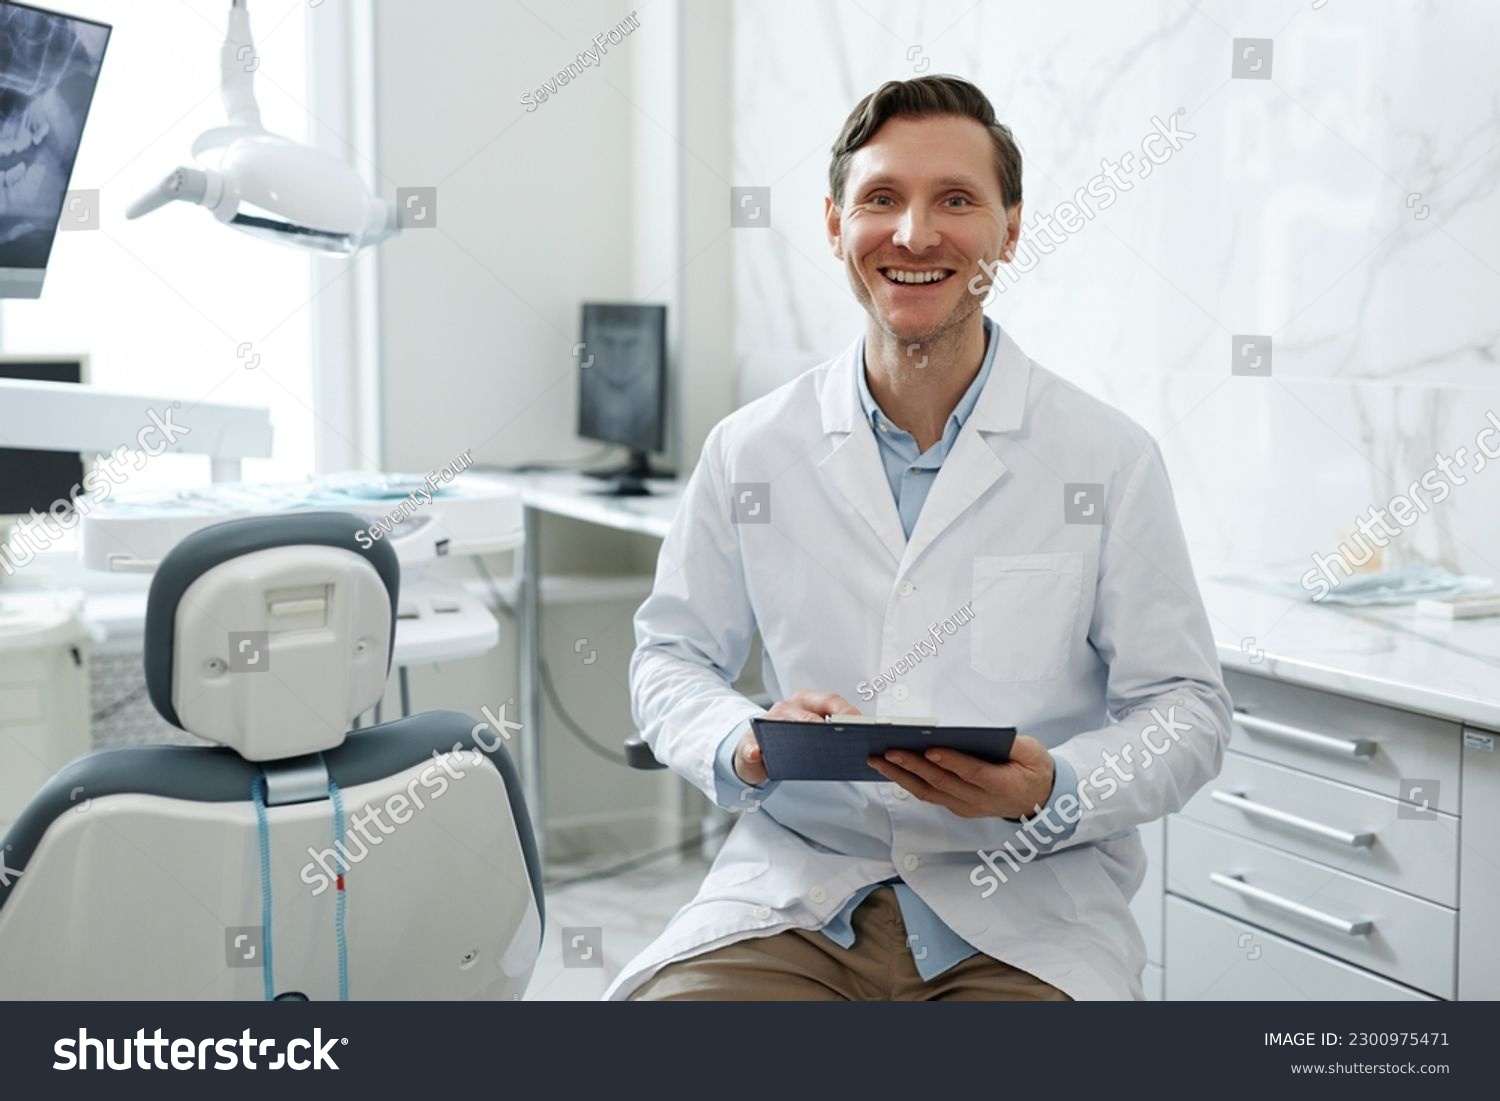 Portrait of smiling male dentist looking at camera in dental clinic interior and holding clipboard, copy space #2300975471